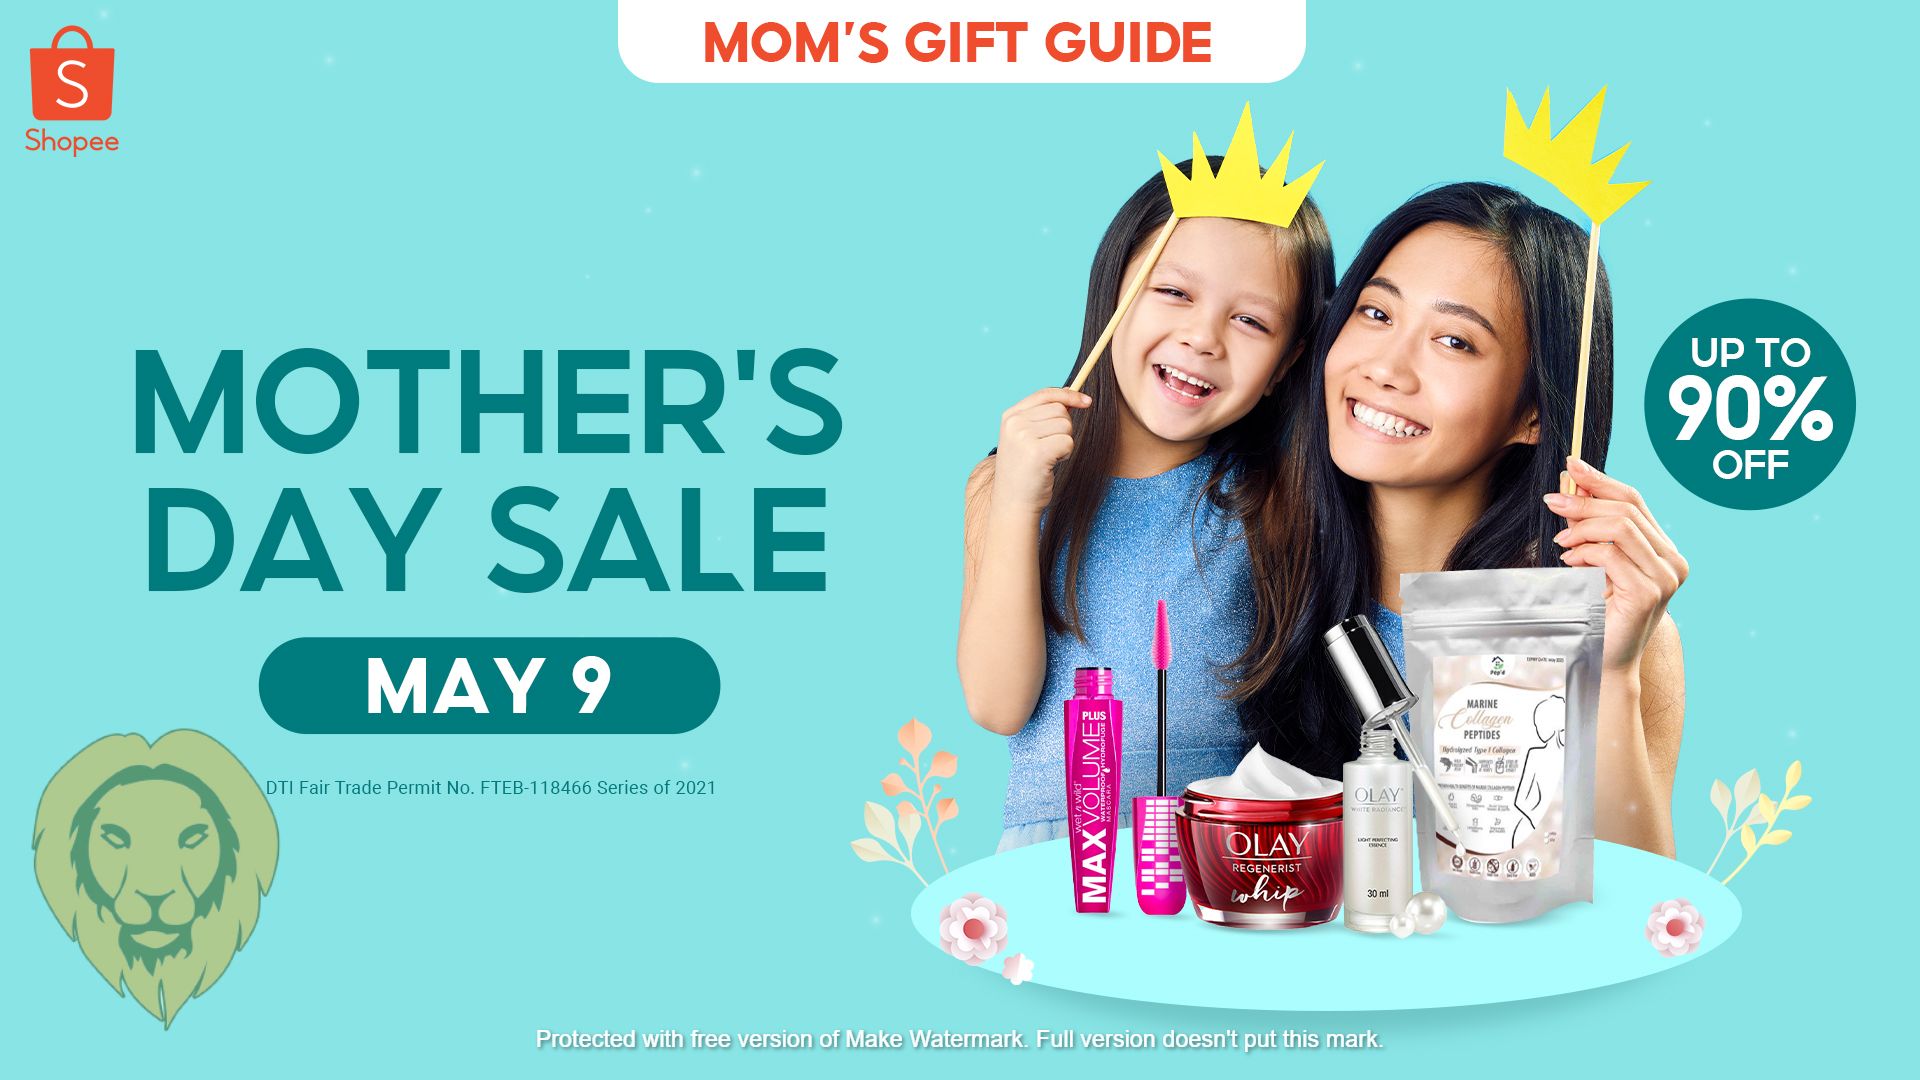 Exciting Mother’s Day Deals and Treats Your Mom Will Love LionhearTV